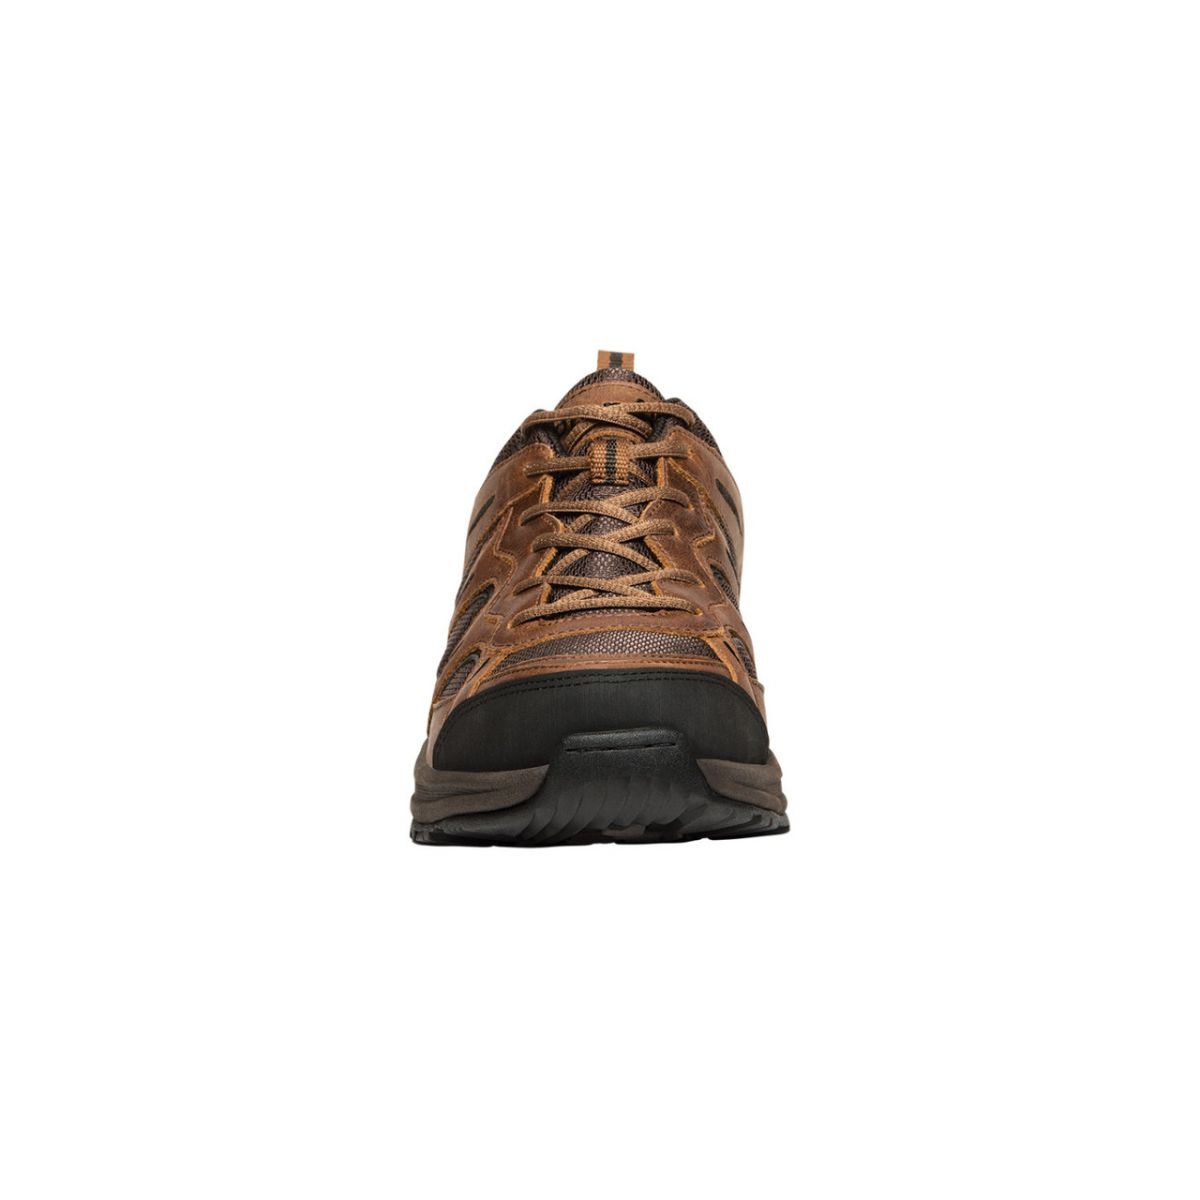 Propet Men's Connelly Hiking Shoe Brown - M5503BR BROWN - BROWN, 8-3E